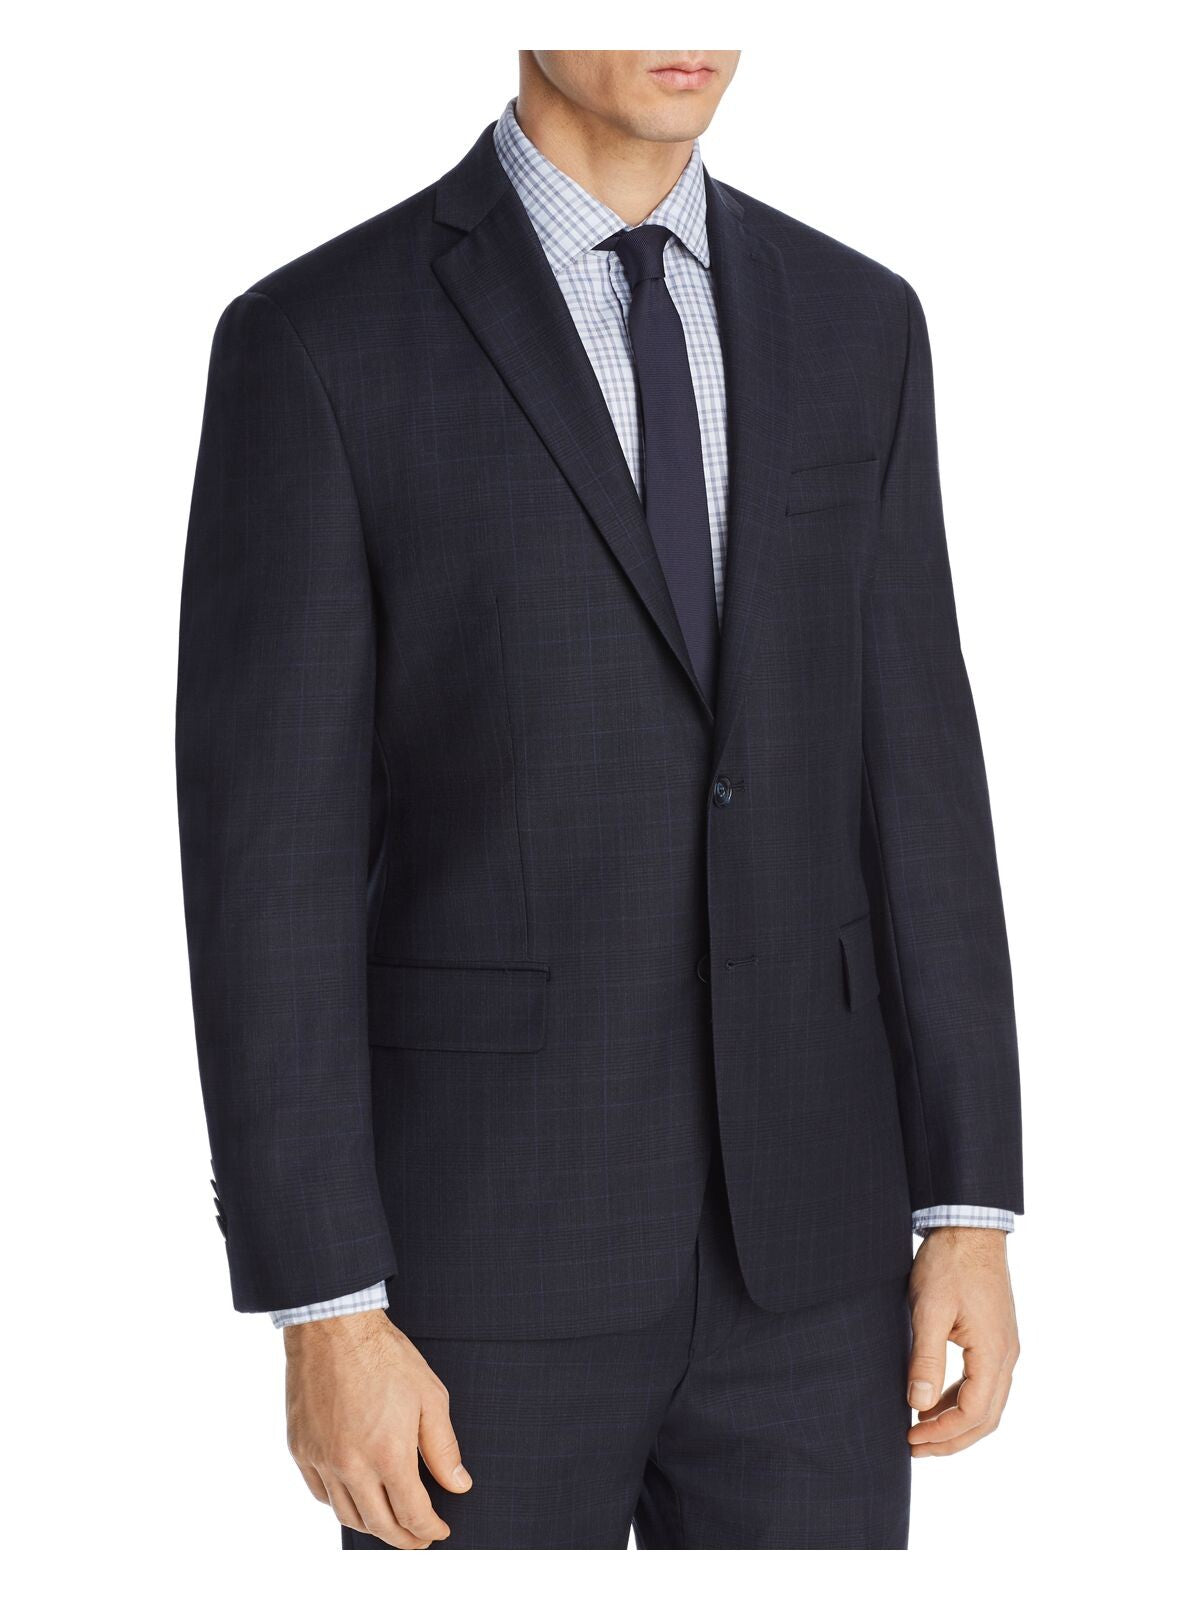 MICHAEL KORS Mens Navy Single Breasted, Windowpane Plaid Classic Fit Suit Separate Blazer Jacket 42S